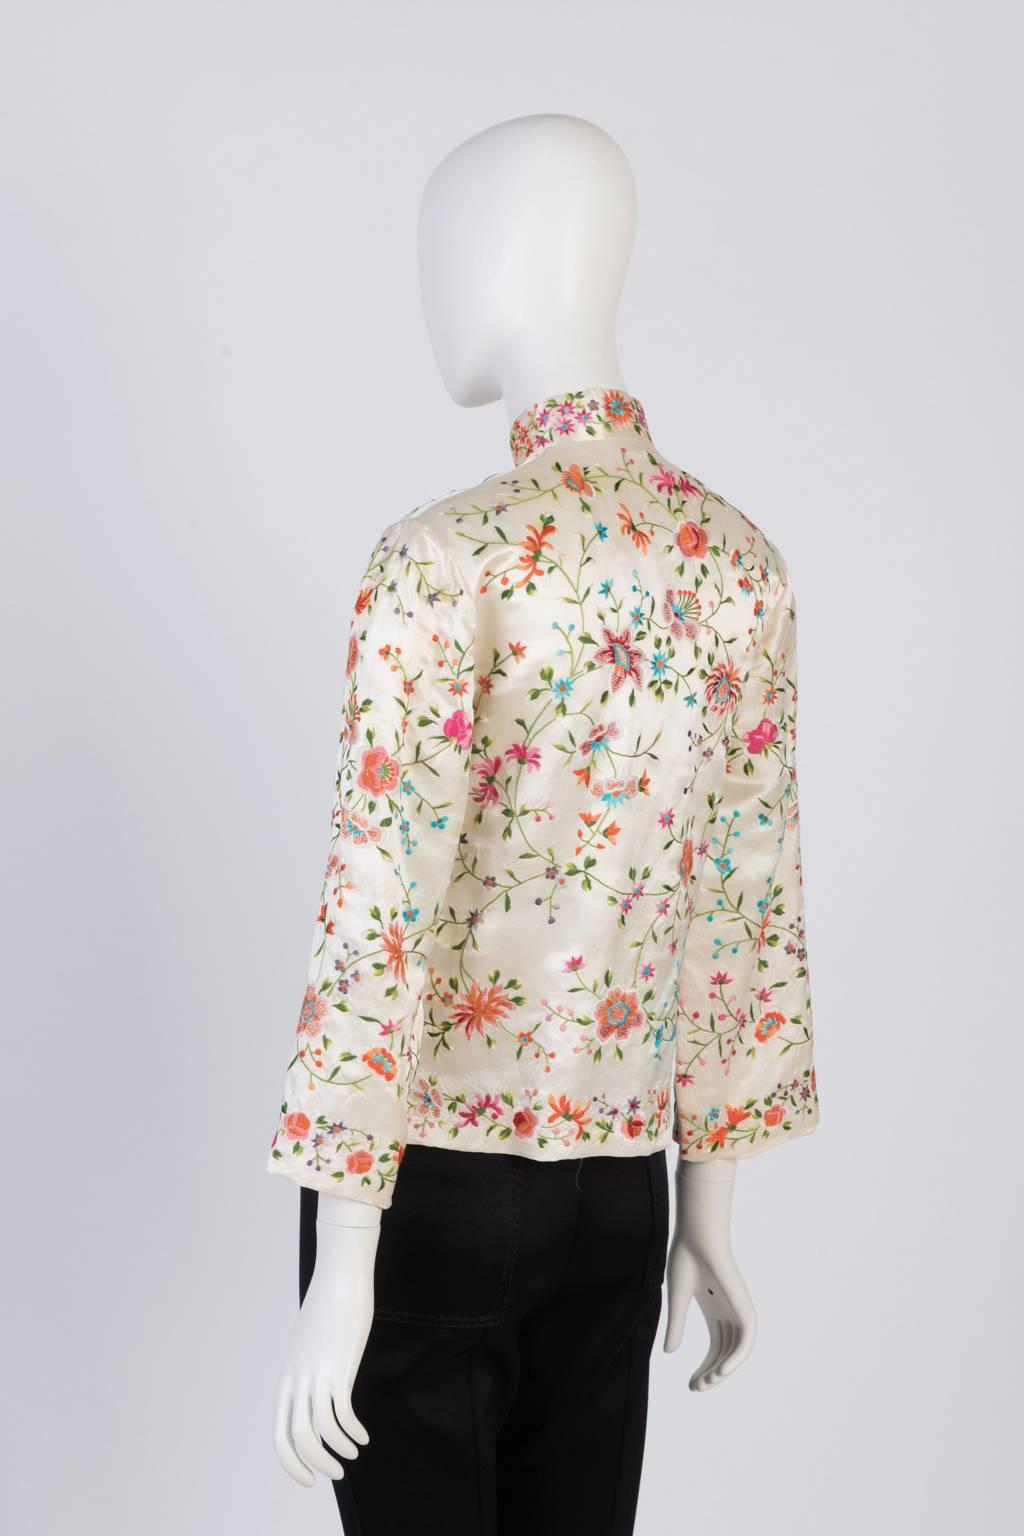 Floral Embroidery Oriental Jacket In Good Condition For Sale In Xiamen, Fujian